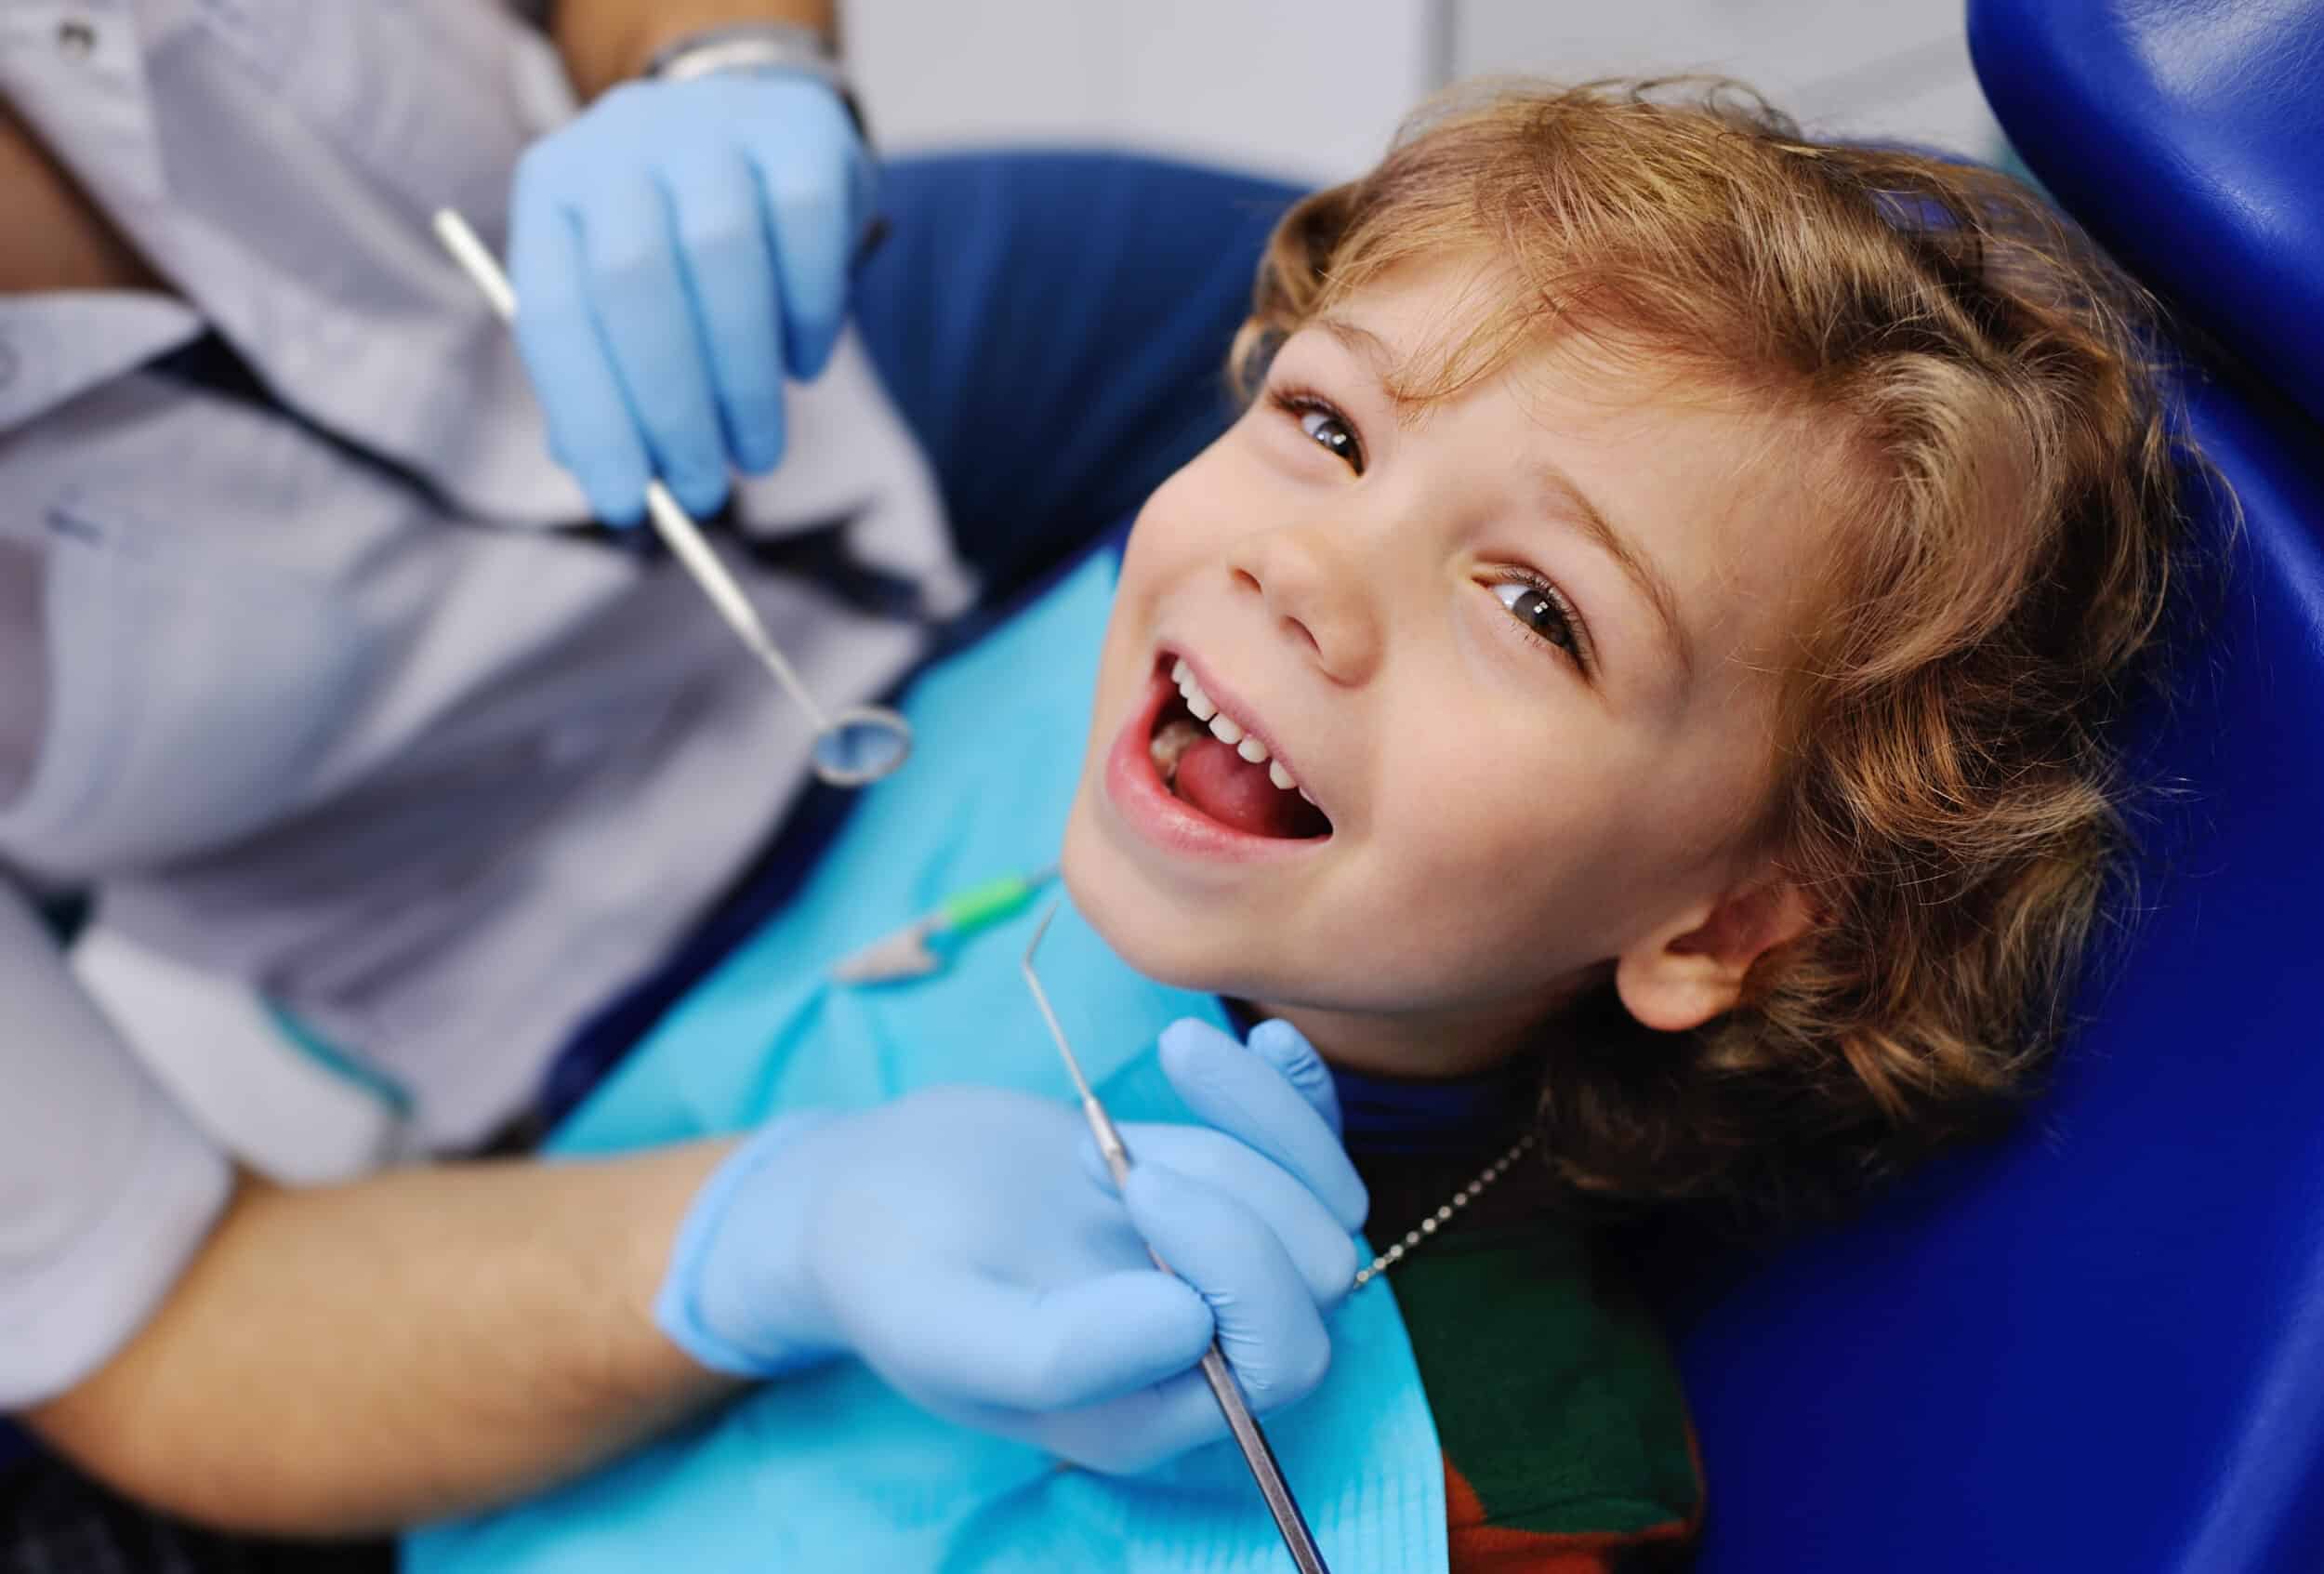 Boston child visits dentist for routine cleaning and examination.